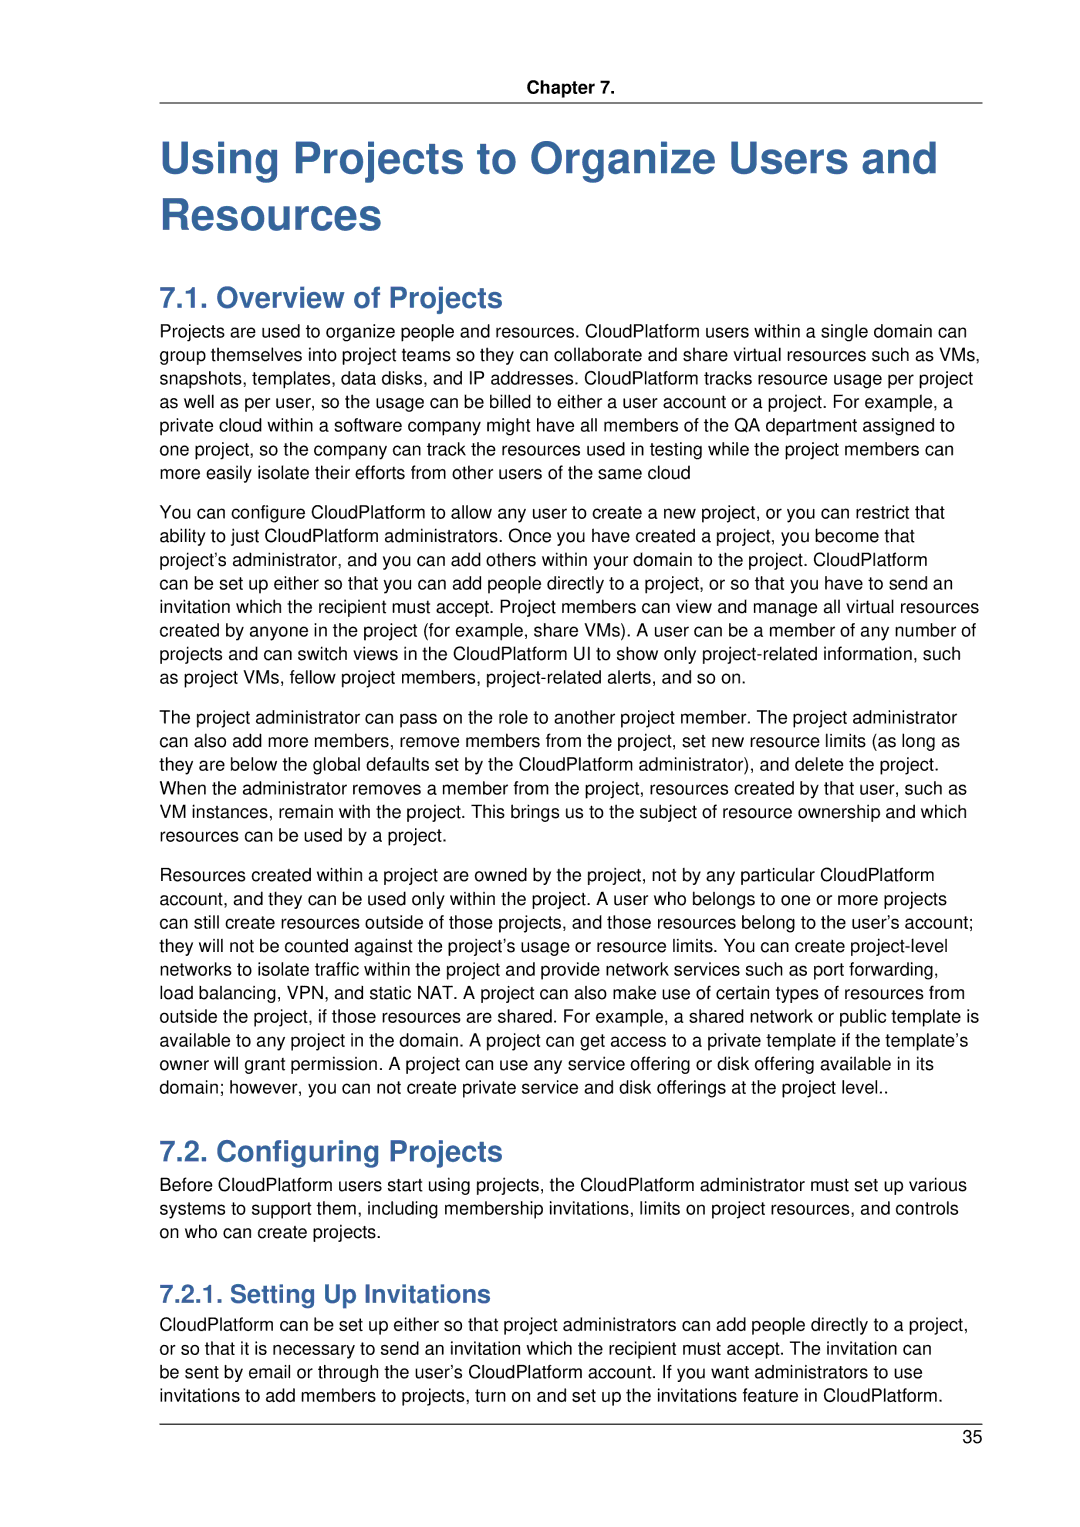 Citrix Systems 4.2 manual Using Projects to Organize Users and Resources, Overview of Projects, Configuring Projects 